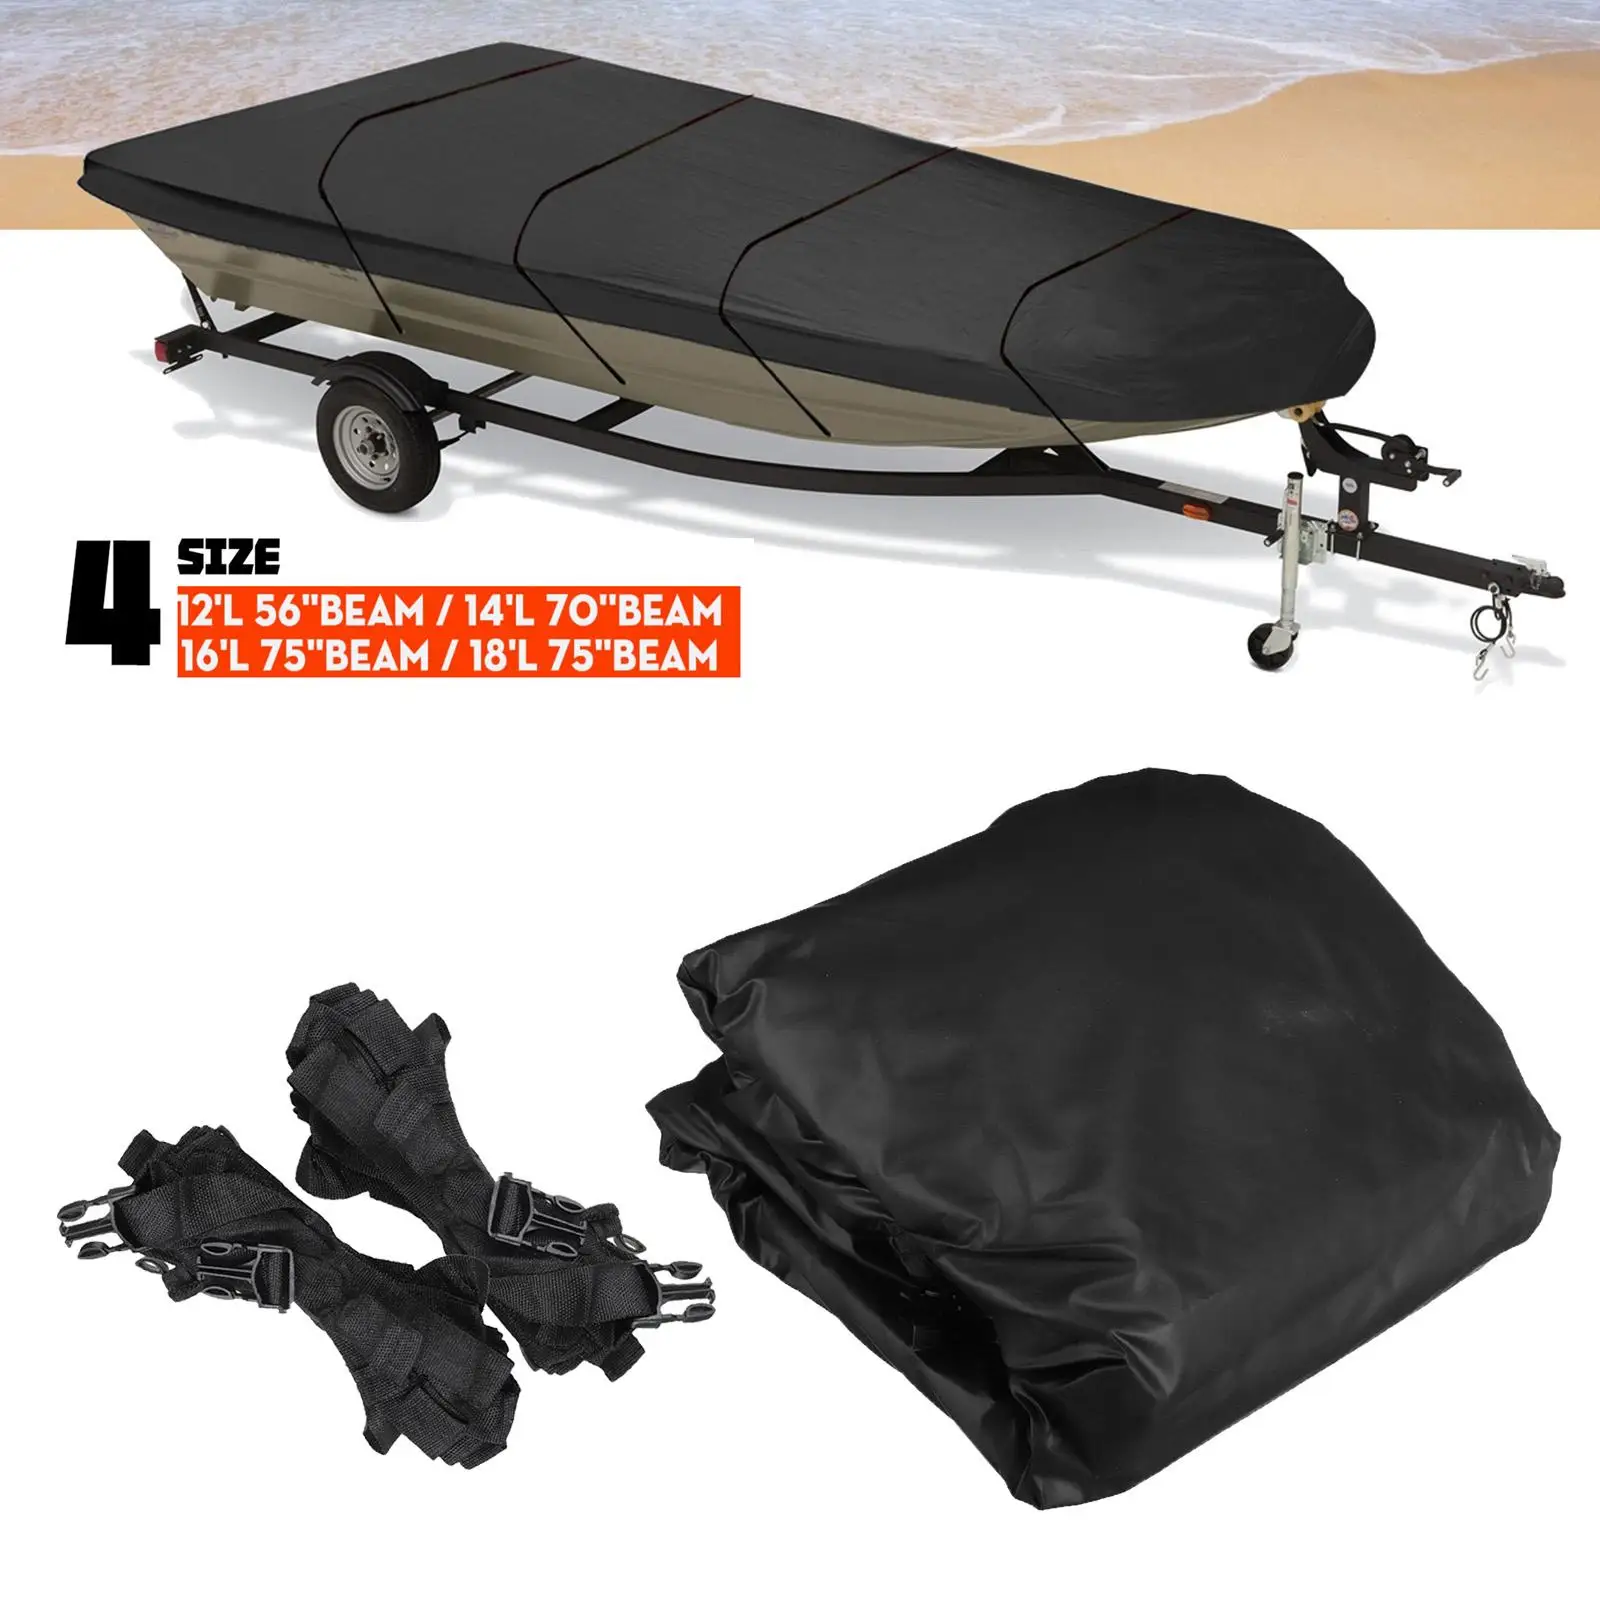  Cover Trailerable Portable  Dustproof Accessories Fits for Harbor